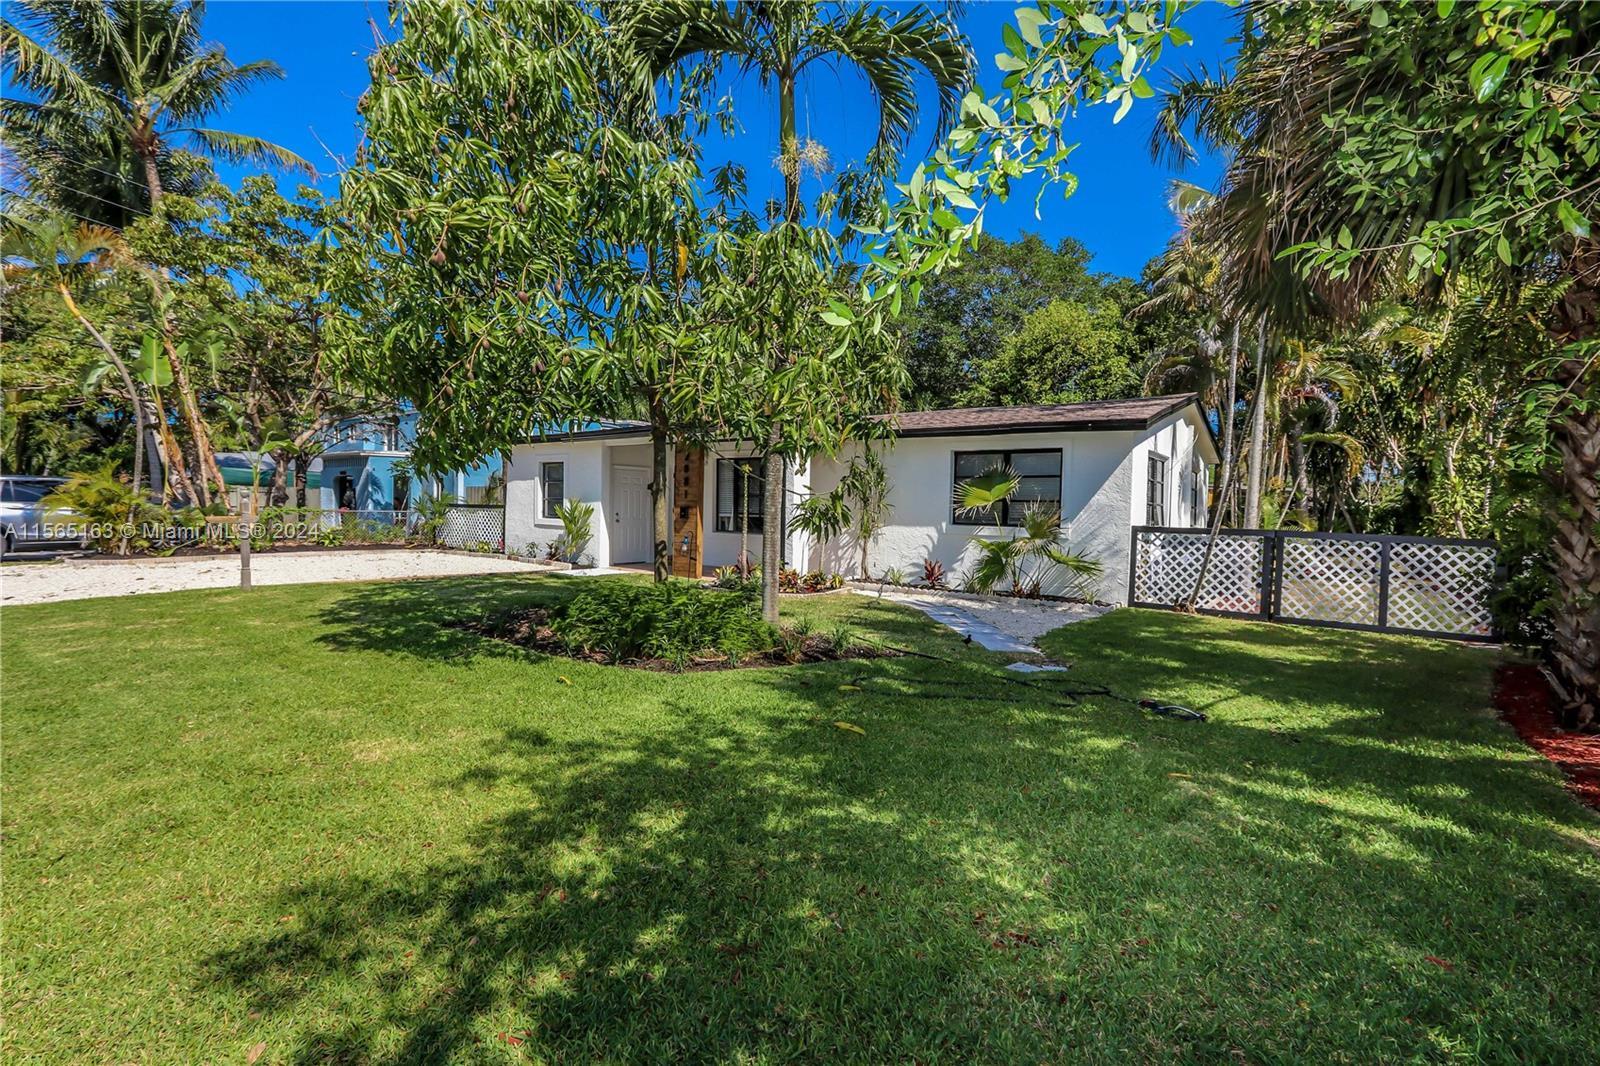 Amazing 3/2 Home in trendy Chula Vista Isles.Yard is nearly 9,000 SF, features massive trees & fully